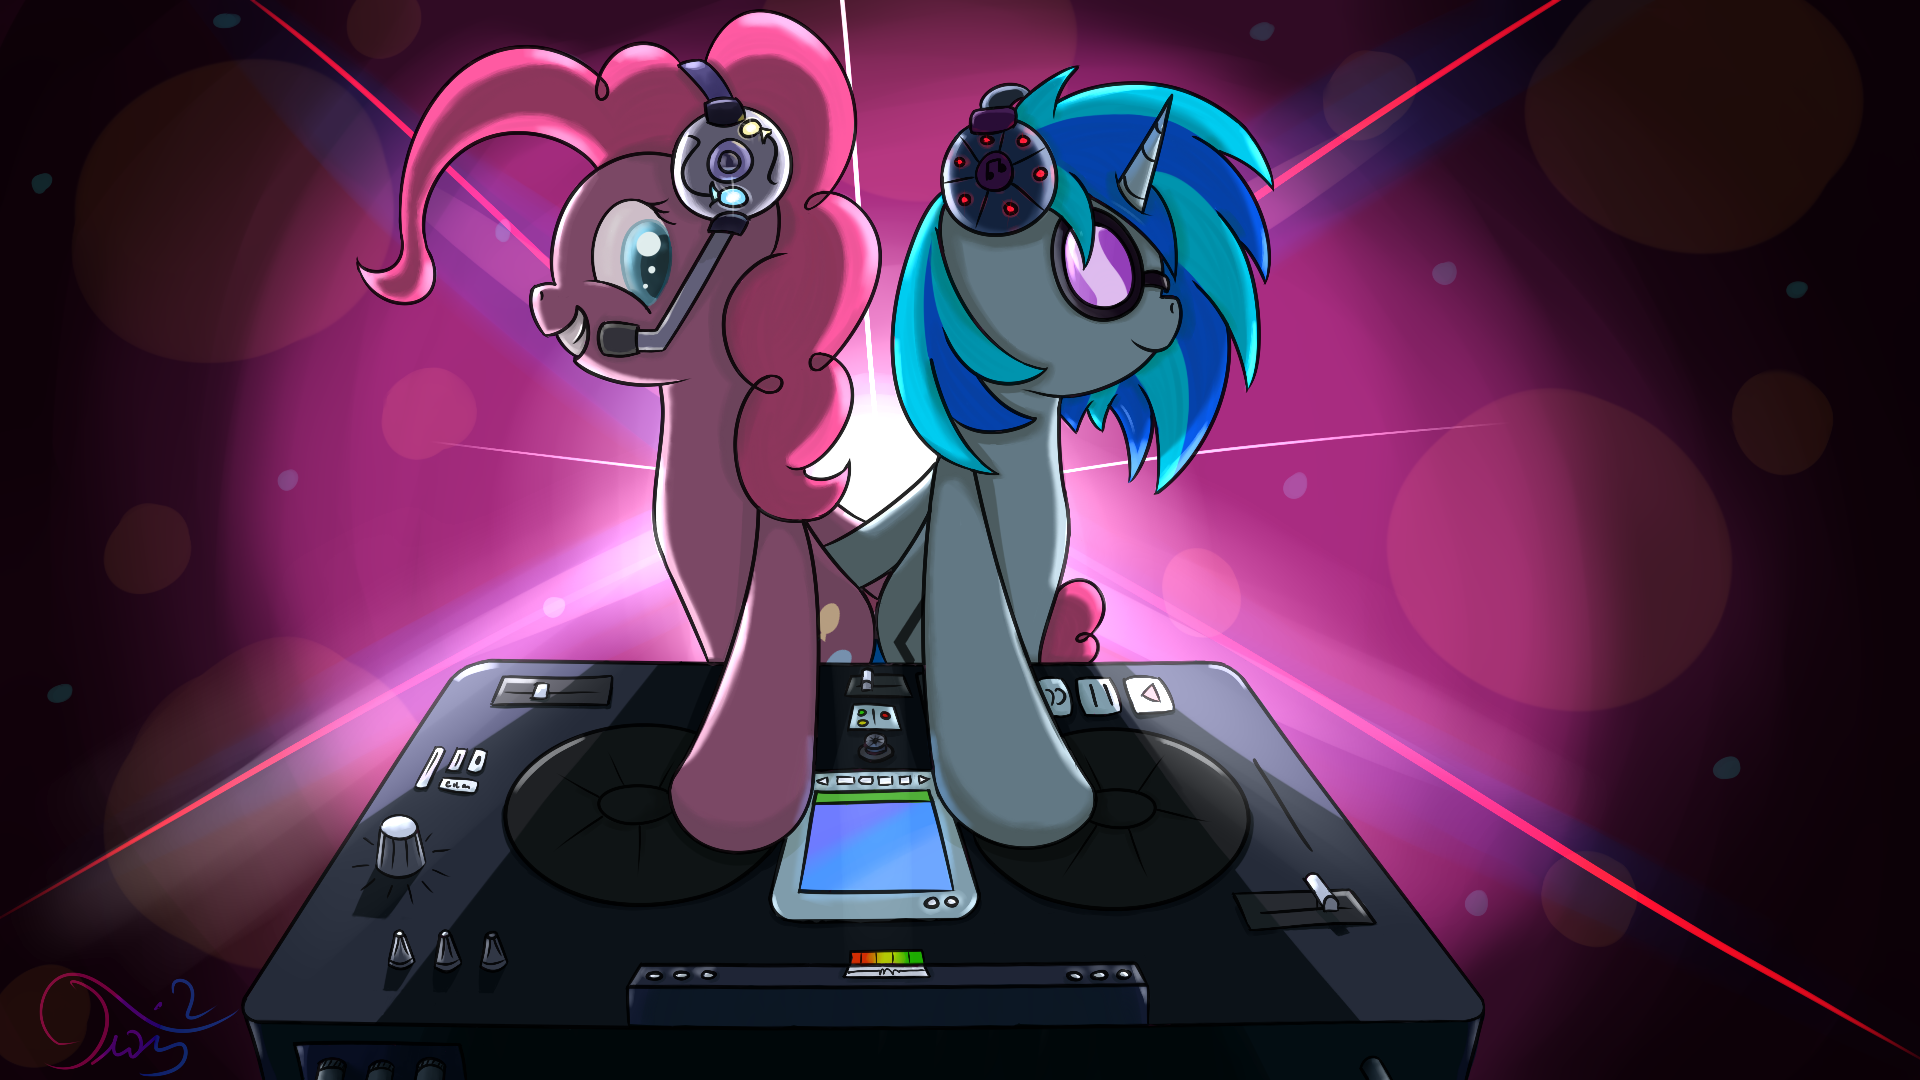 Party With Pinkie